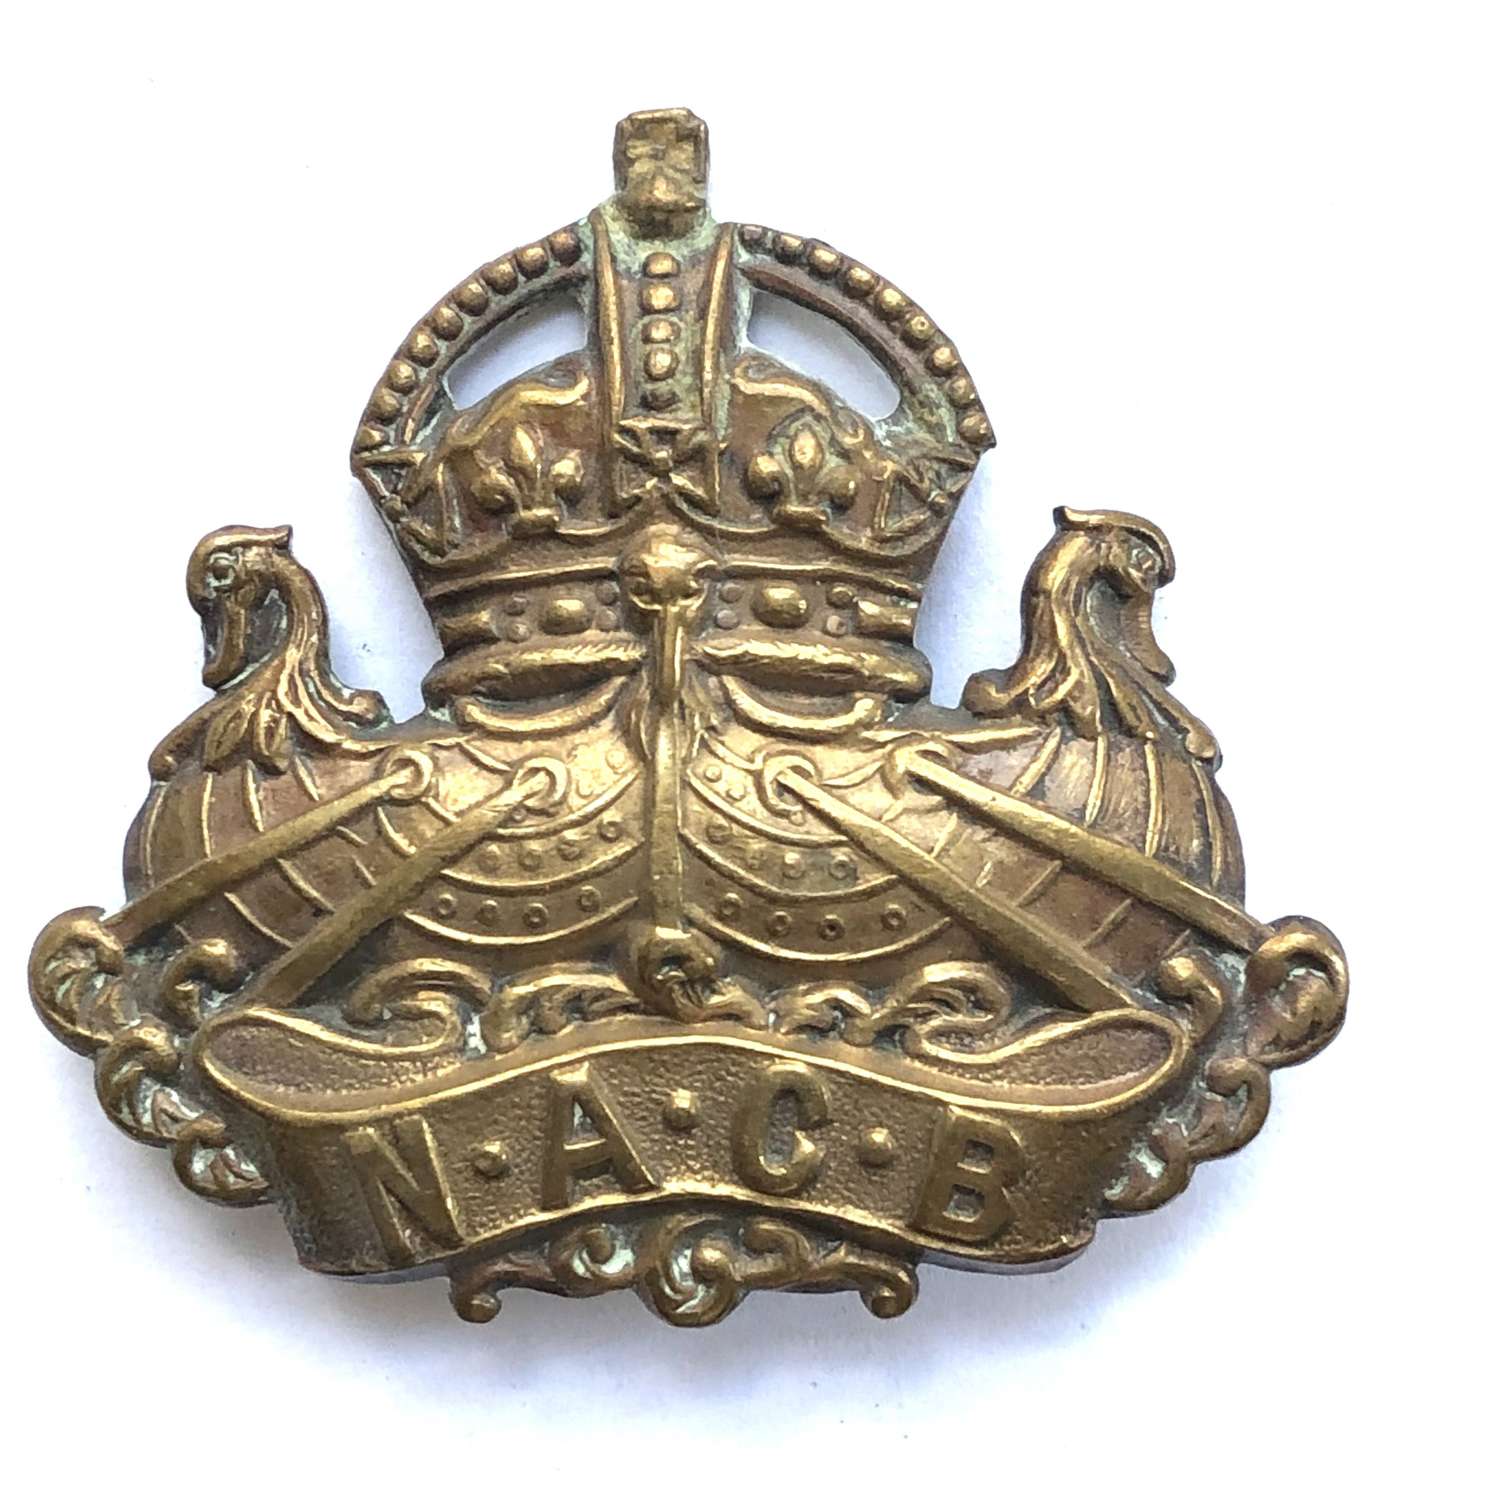 Naval and Army Canteens Board oost 1917 WW1 cap badge